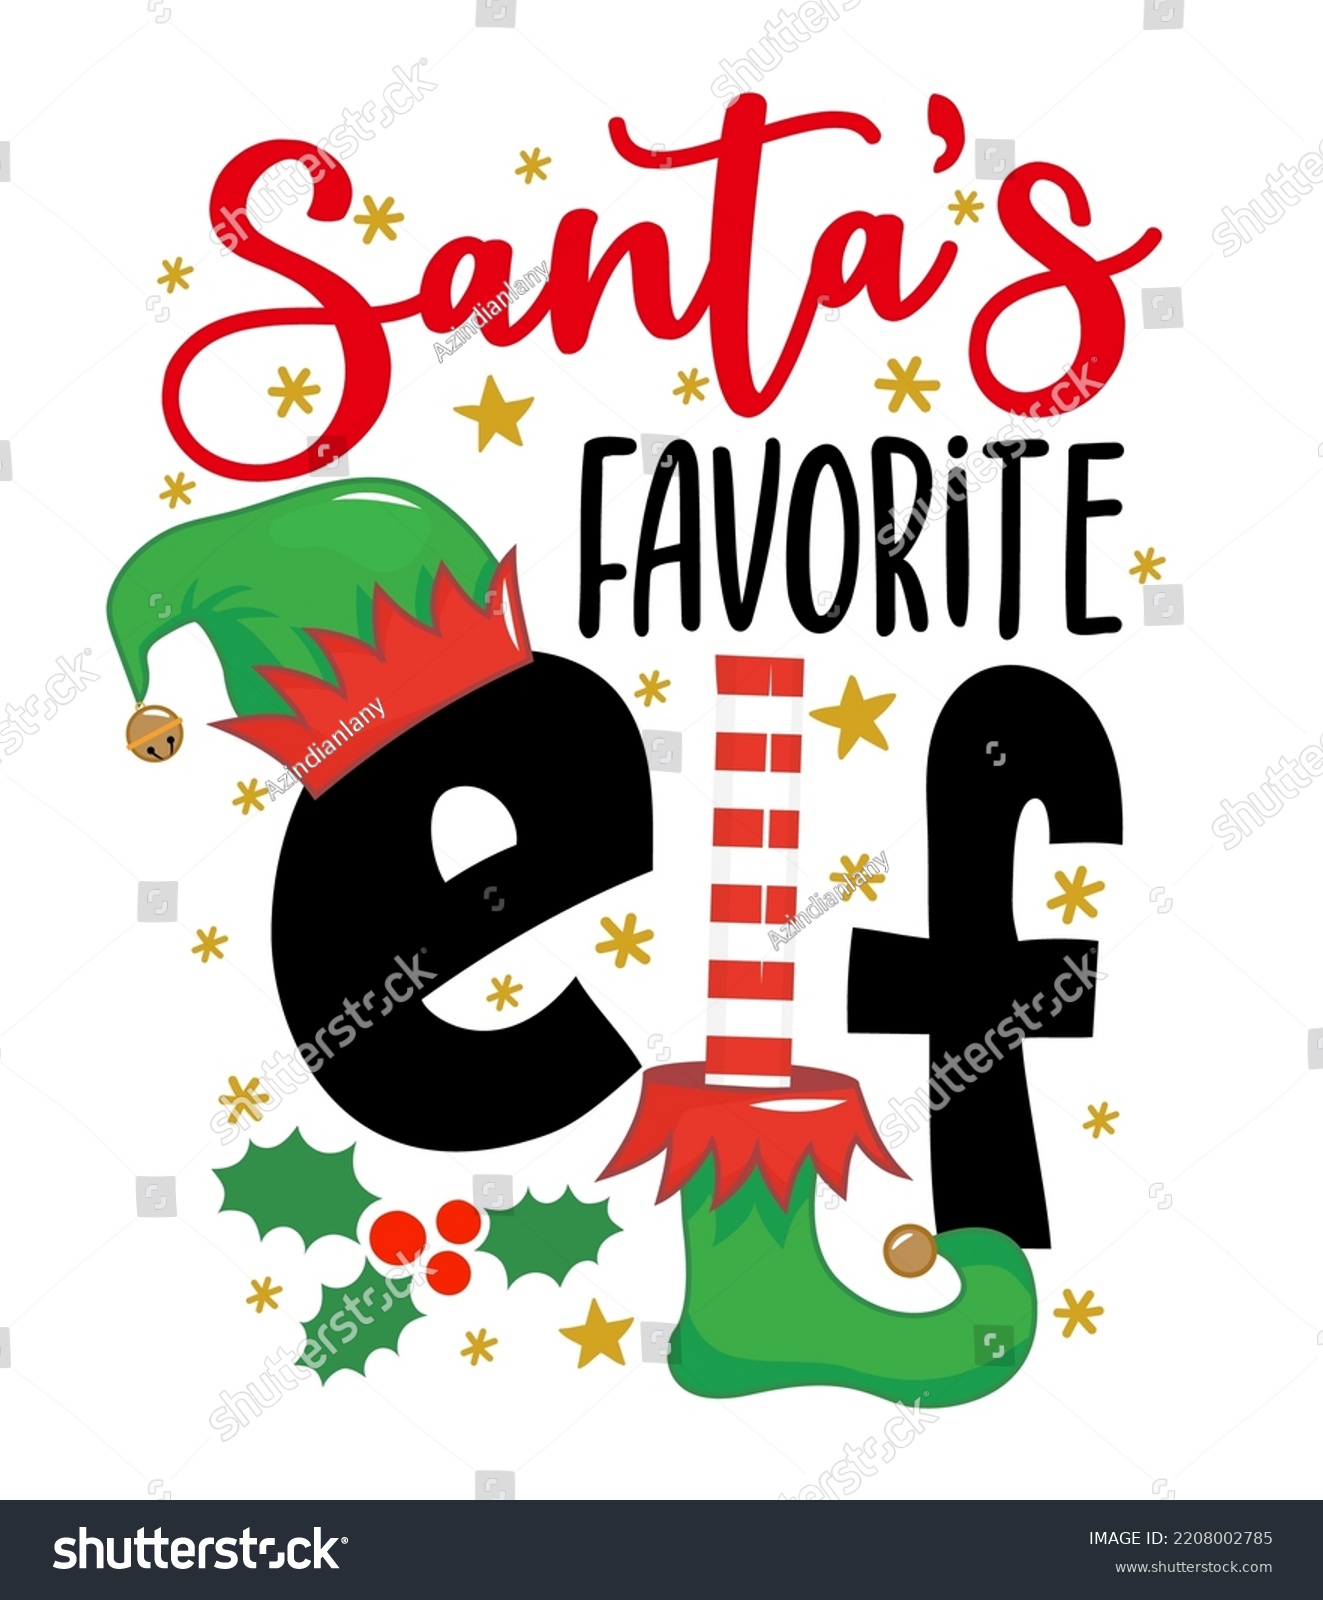 SVG of Santa's favorite Elf - phrase for Christmas baby, kid clothes or ugly sweaters. Hand drawn lettering for Xmas greetings cards, invitations. Good for t-shirt, mug, gift, printing press. Little Elf. svg